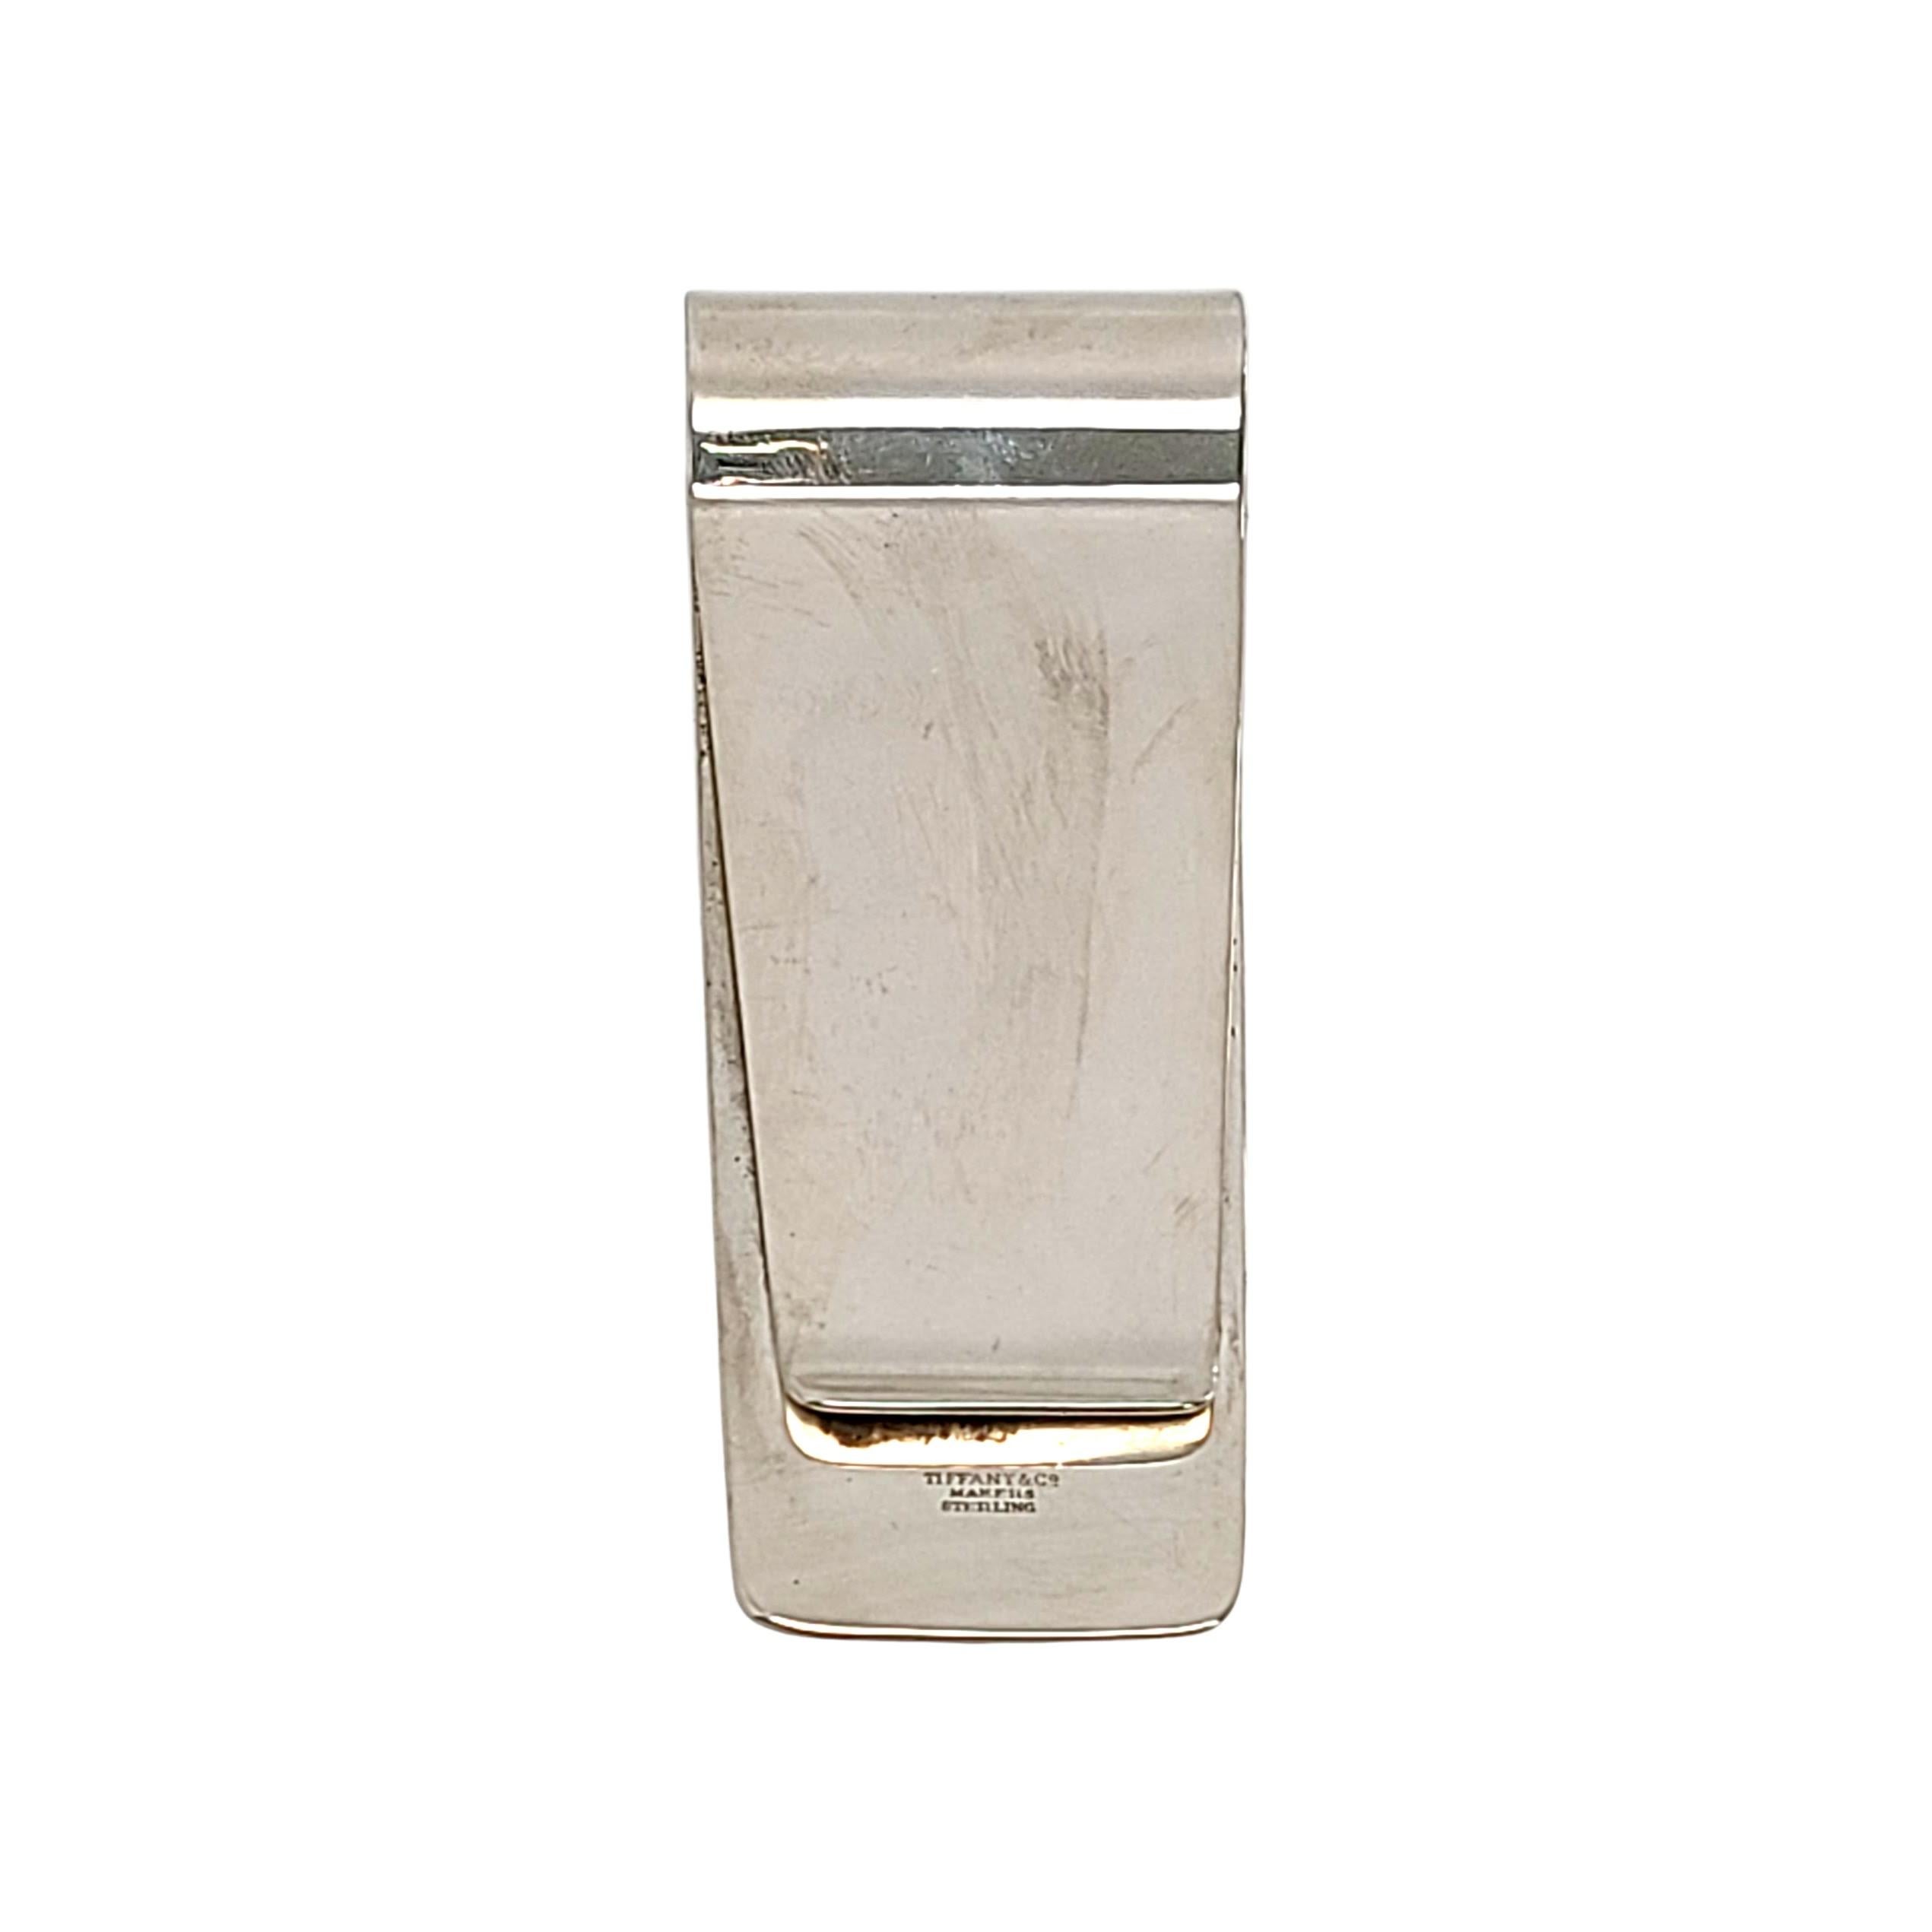 Sterling silver large money clip by Tiffany & Co.

Authentic Tiffany & Co money or card clip is large and substantially sized. It features a classic and timeless polished design. Tiffany box and pouch not included.

No monogram

Measures approx 4